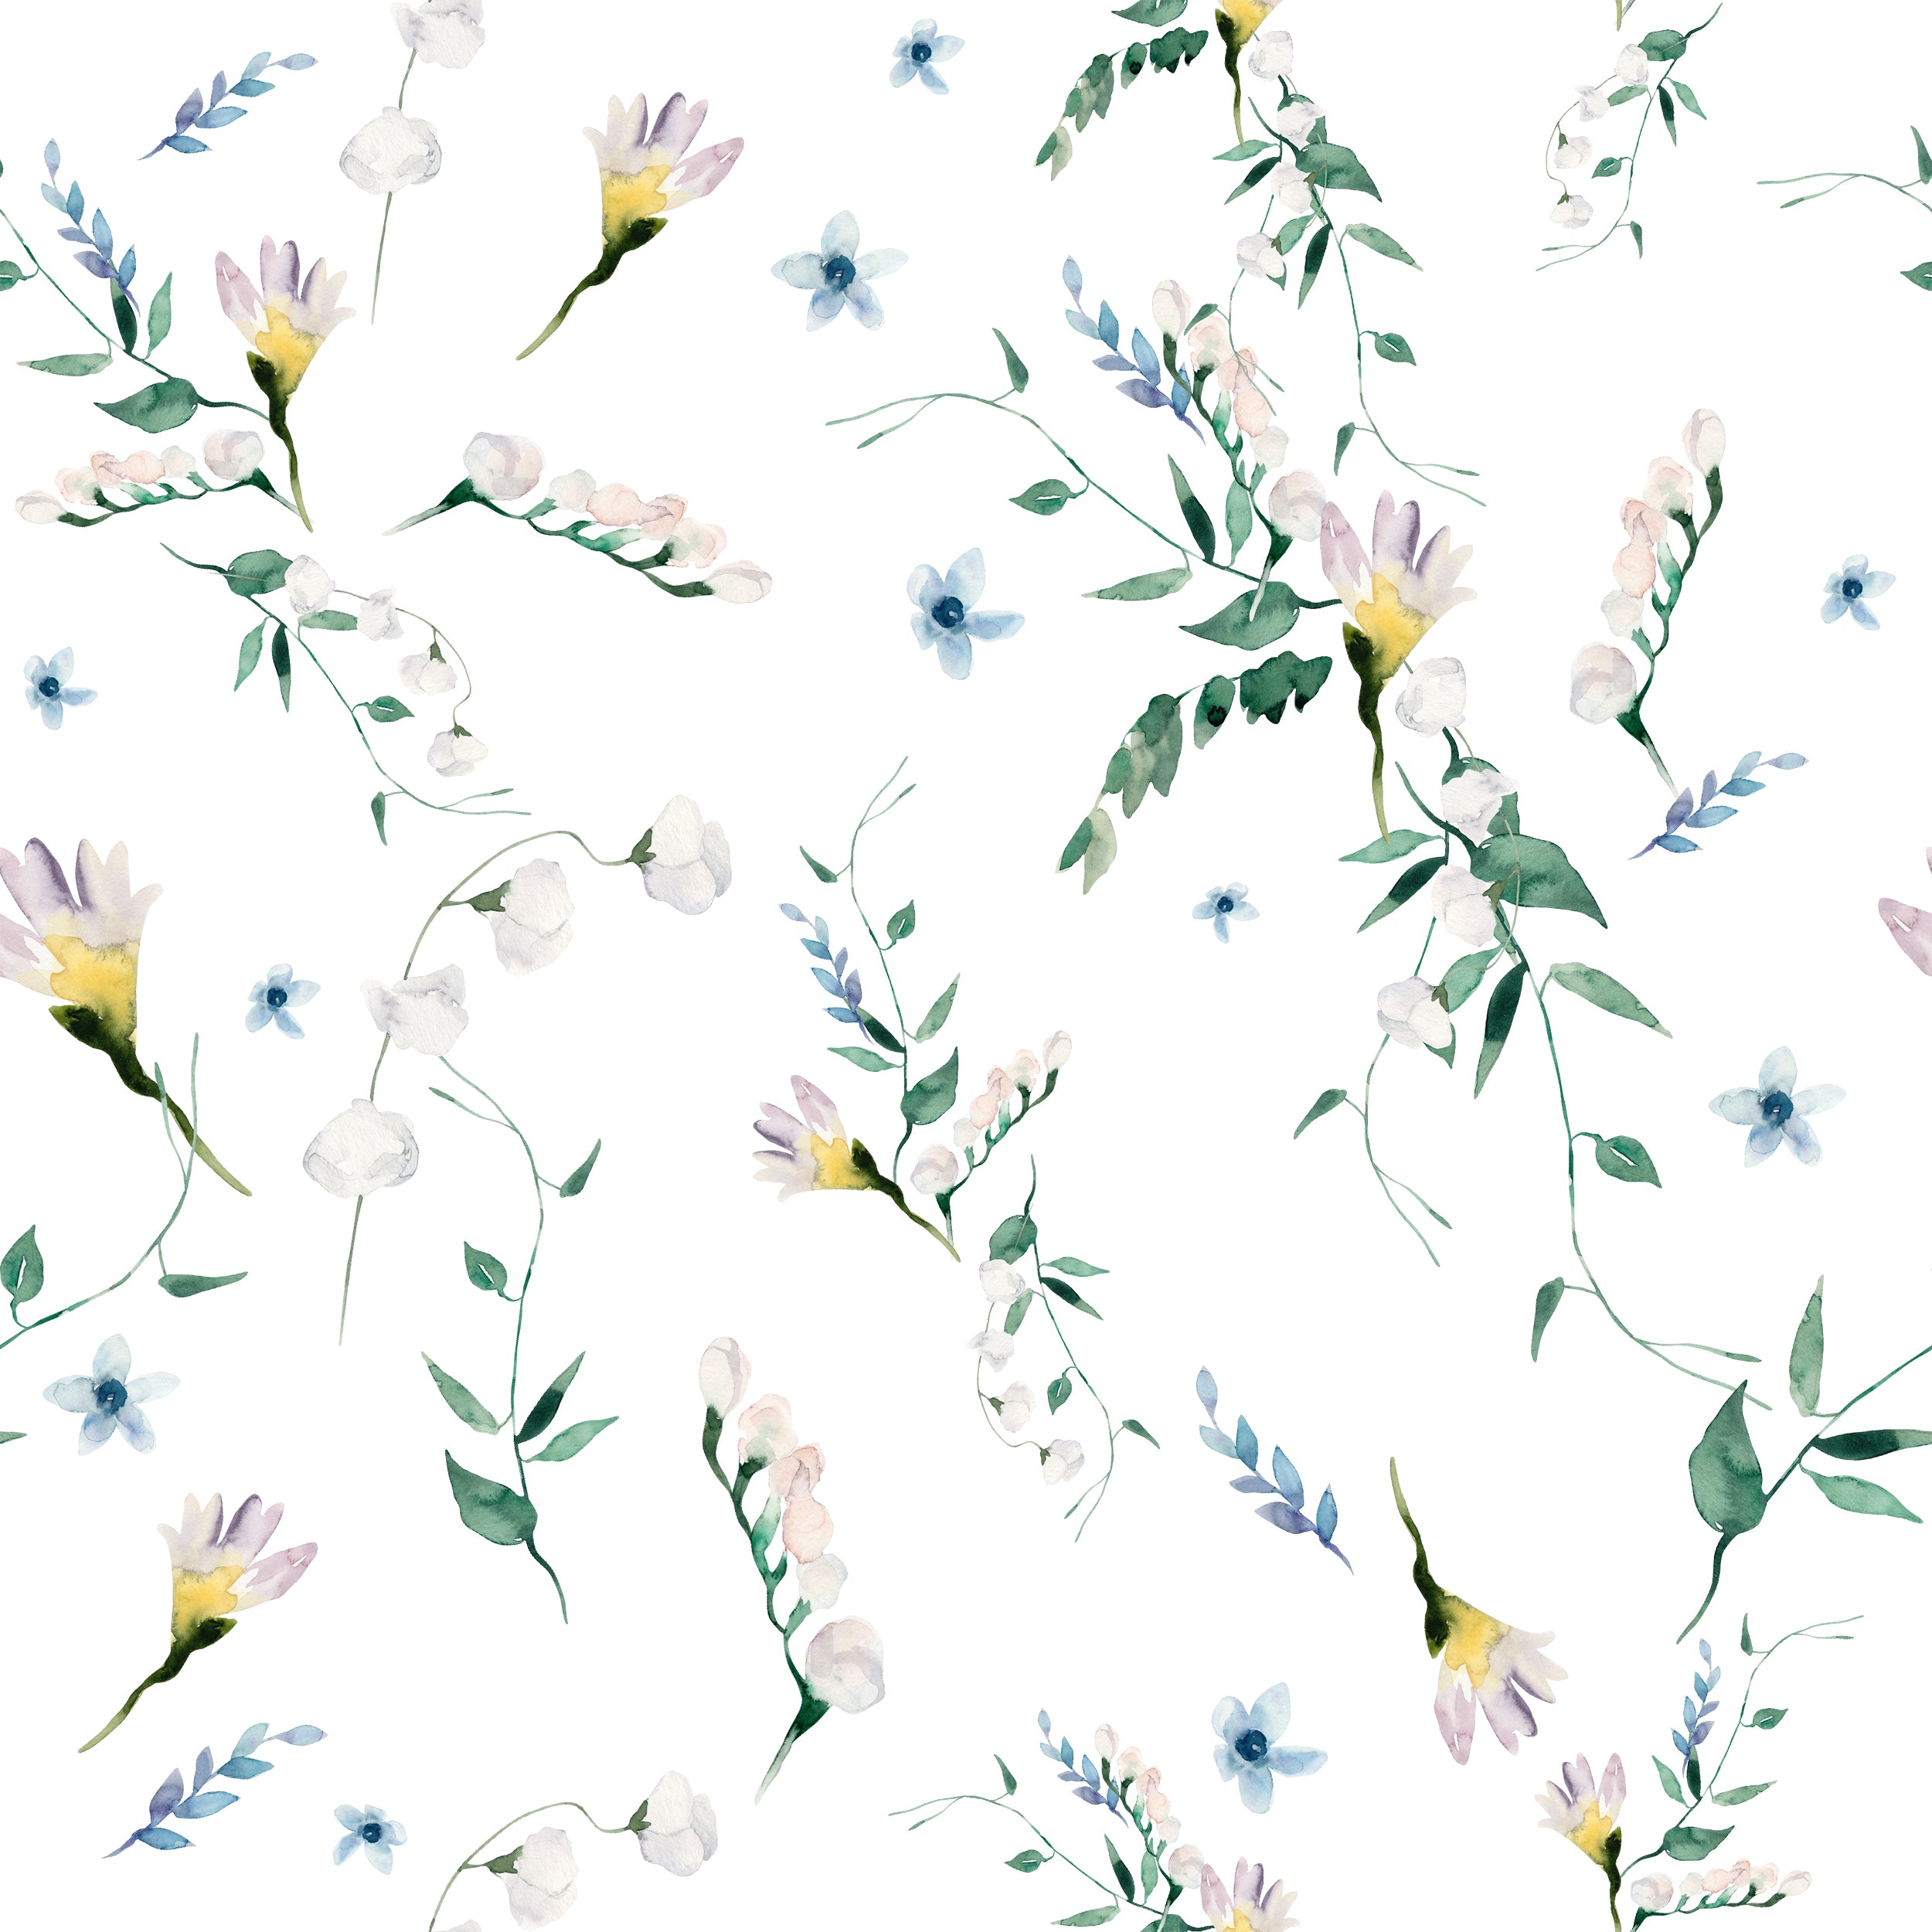 Close-up view of the Blossom Breeze Wallpaper, displaying a soft and airy pattern with small blue and yellow flowers intertwined with light green leaves on a clean white background, offering a fresh and lively botanical aesthetic.